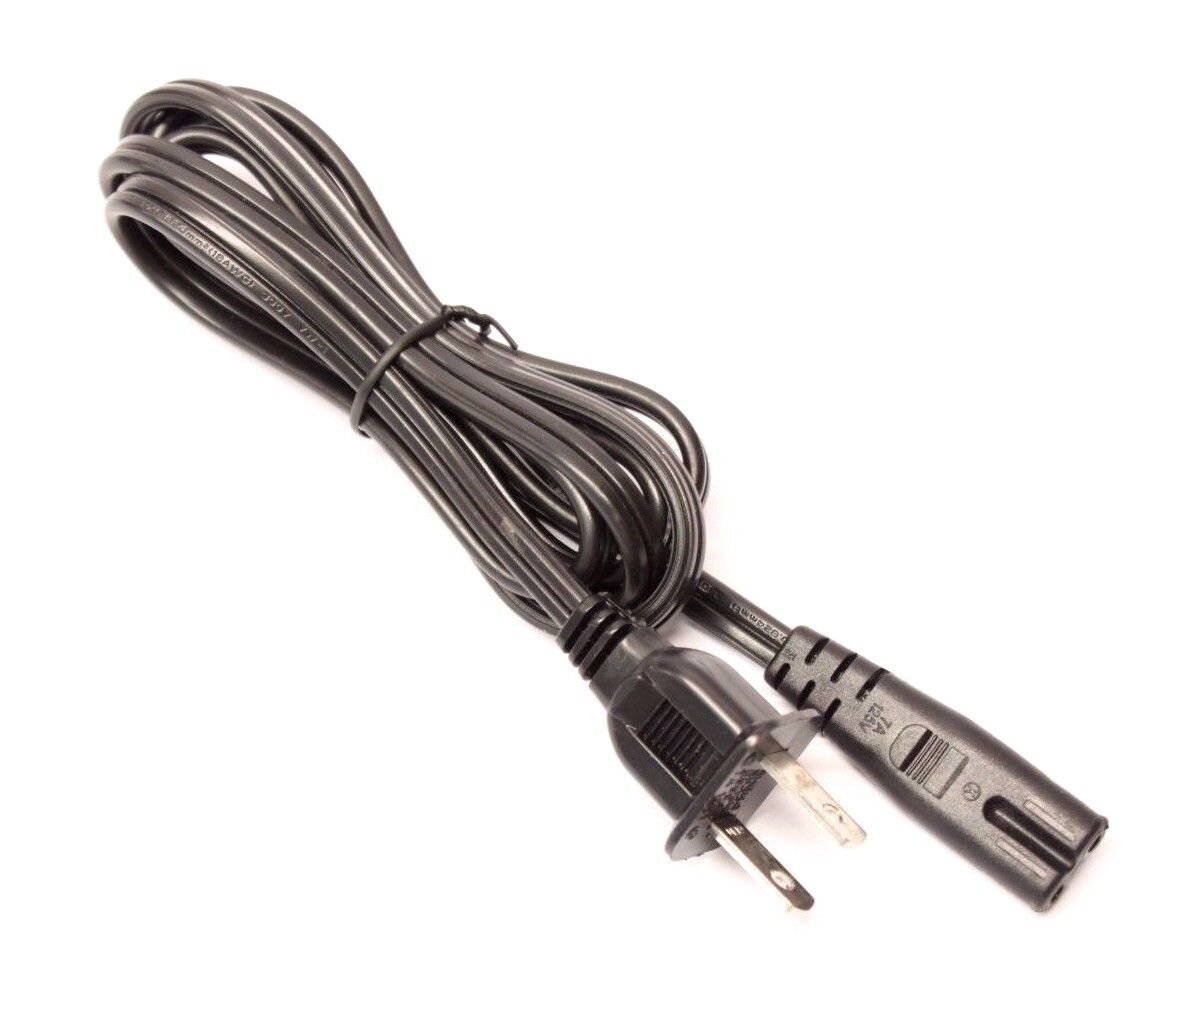 5FT 2 Prong Figure 8 AC Power Cord Cable Plug for PS3 Slim Dell Laptop Adapter 